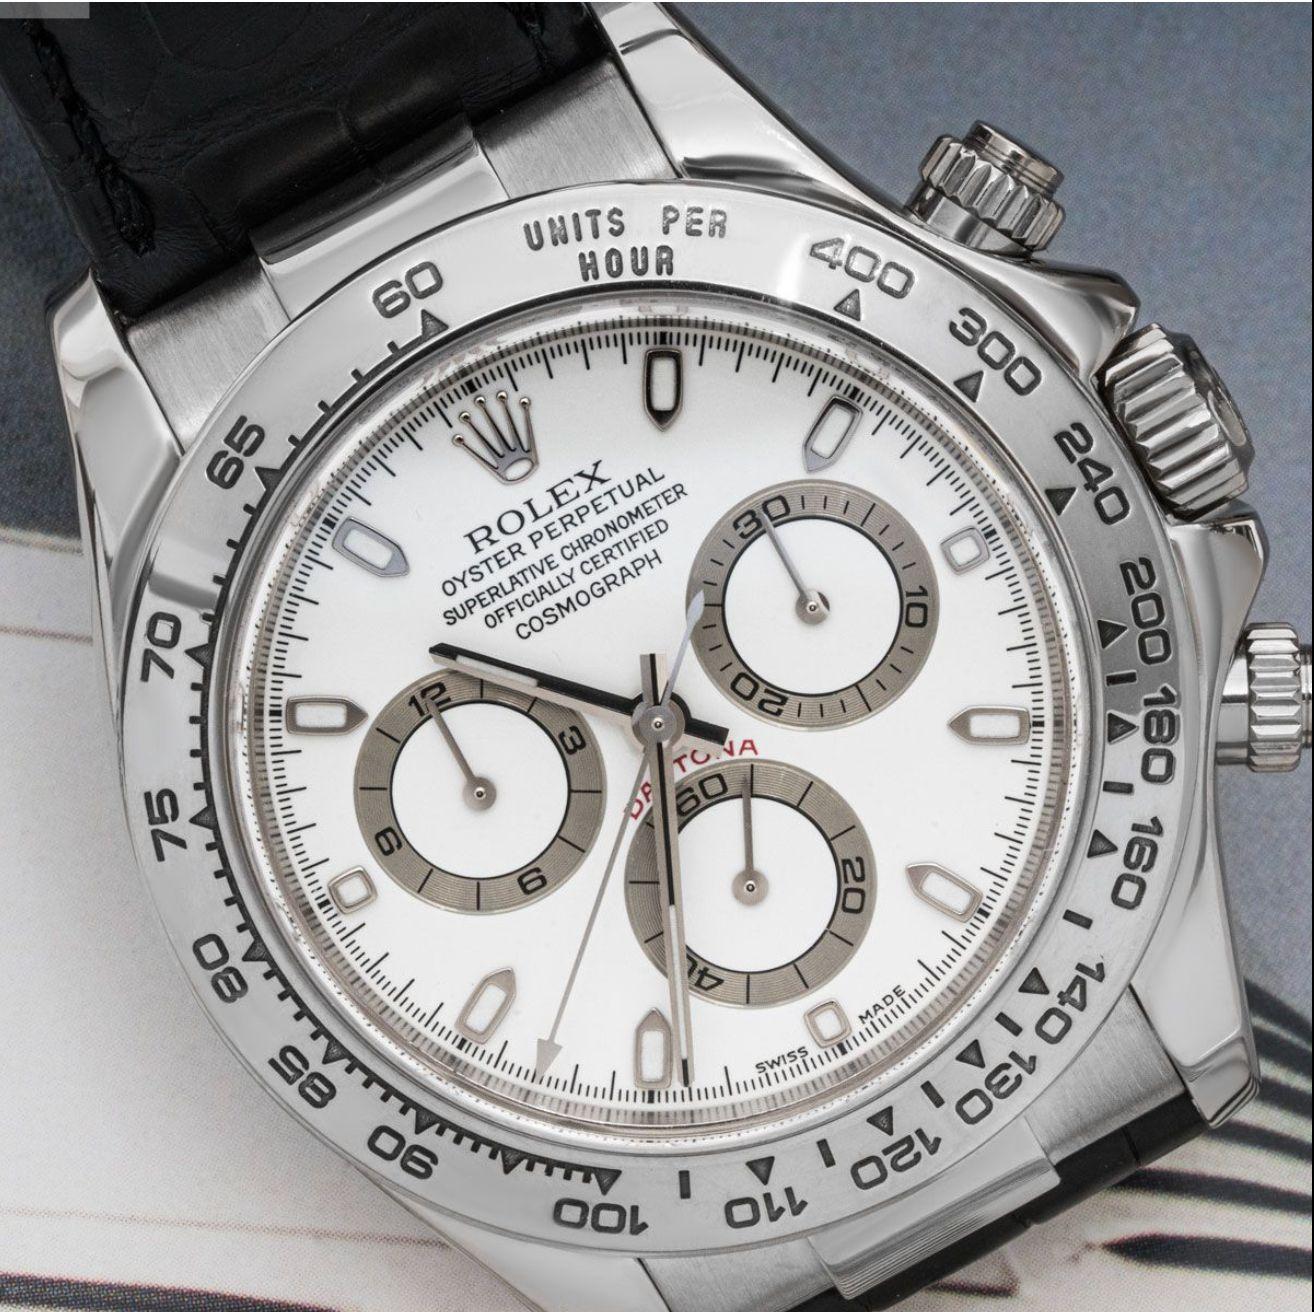 A men's 40mm Daytona crafted in white gold by Rolex.  Featuring a white dial with applied hour markers and a white gold bezel that features a tachymetric scale, three counters, and pushers; the Daytona was produced to be the ultimate timing tool for